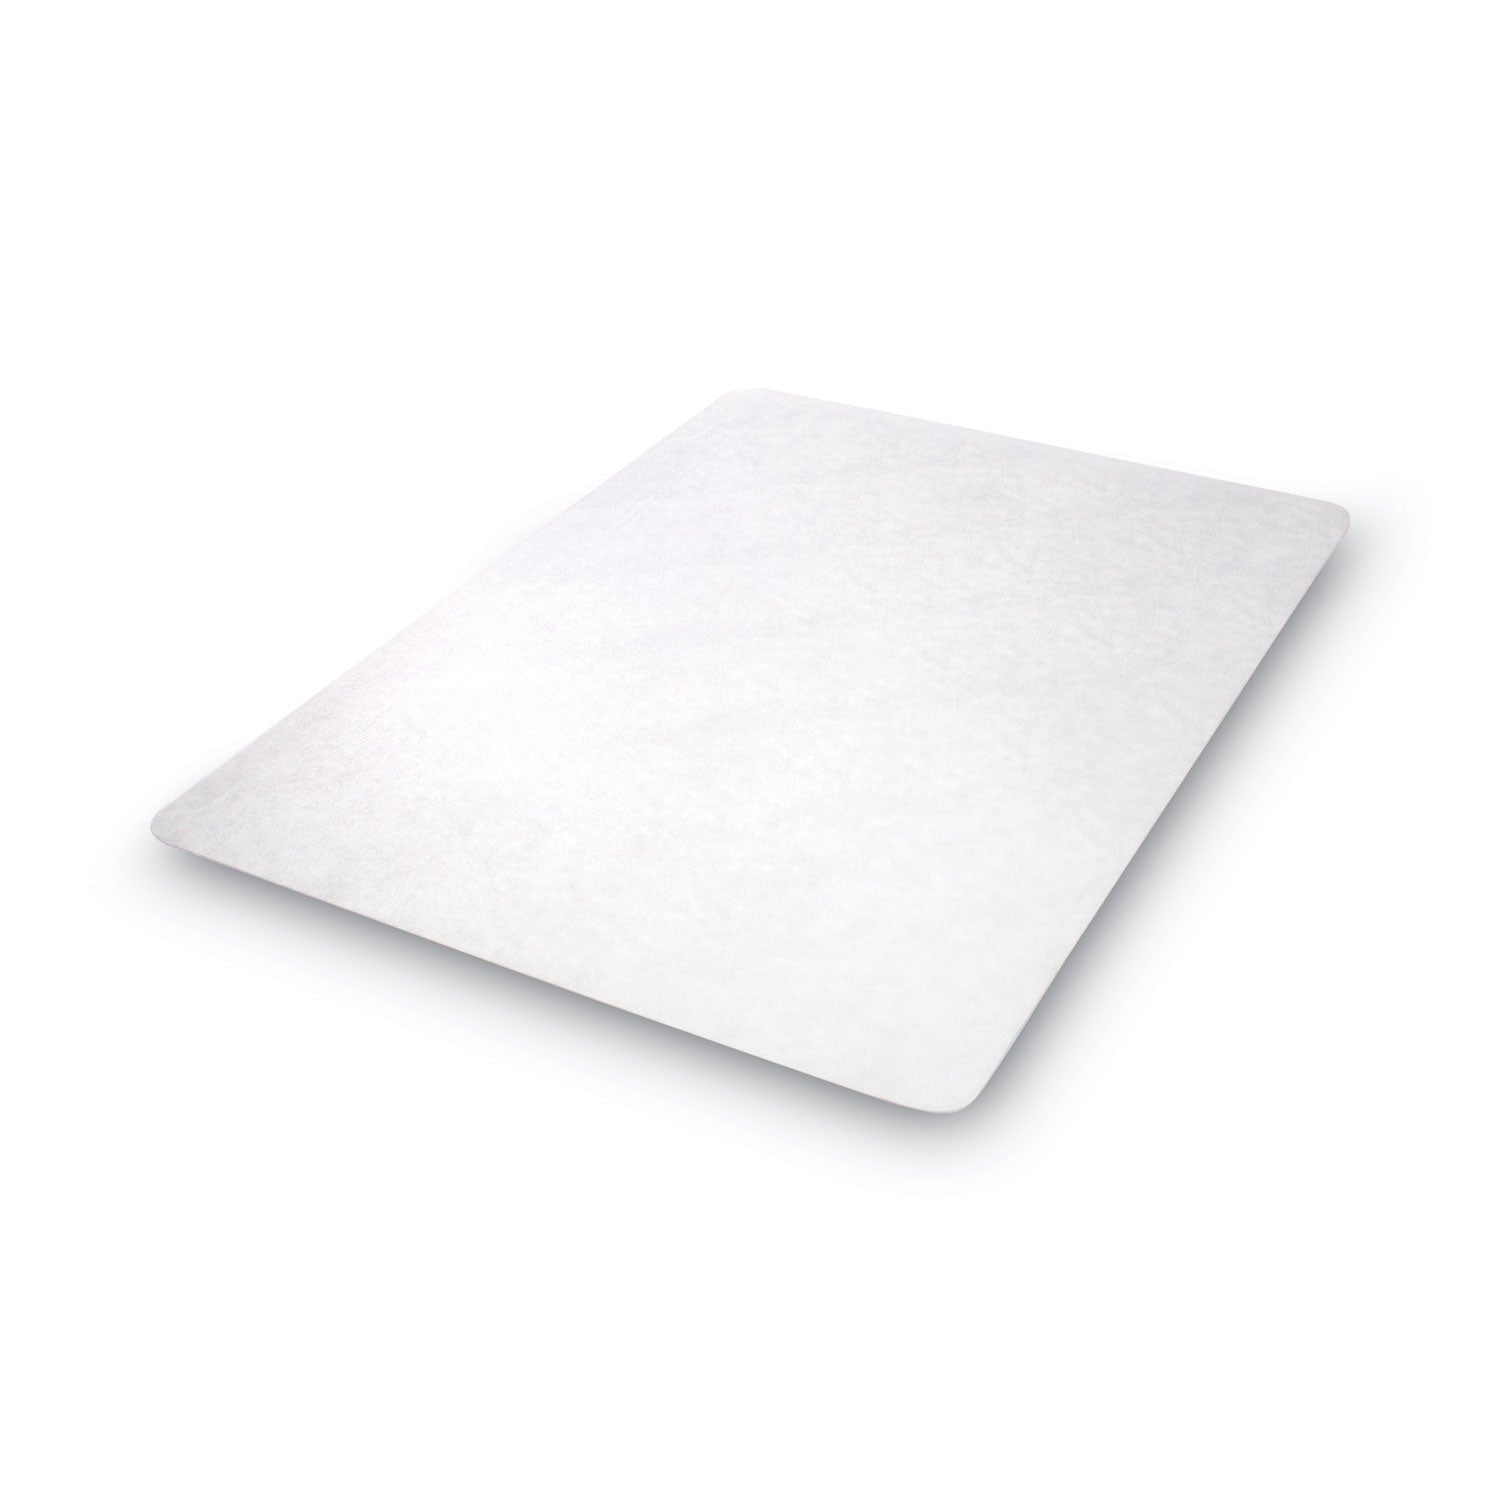 economat-all-day-use-chair-mat-for-hard-floors-rolled-packed-46-x-60-clear_defcm2e442fcom - 6